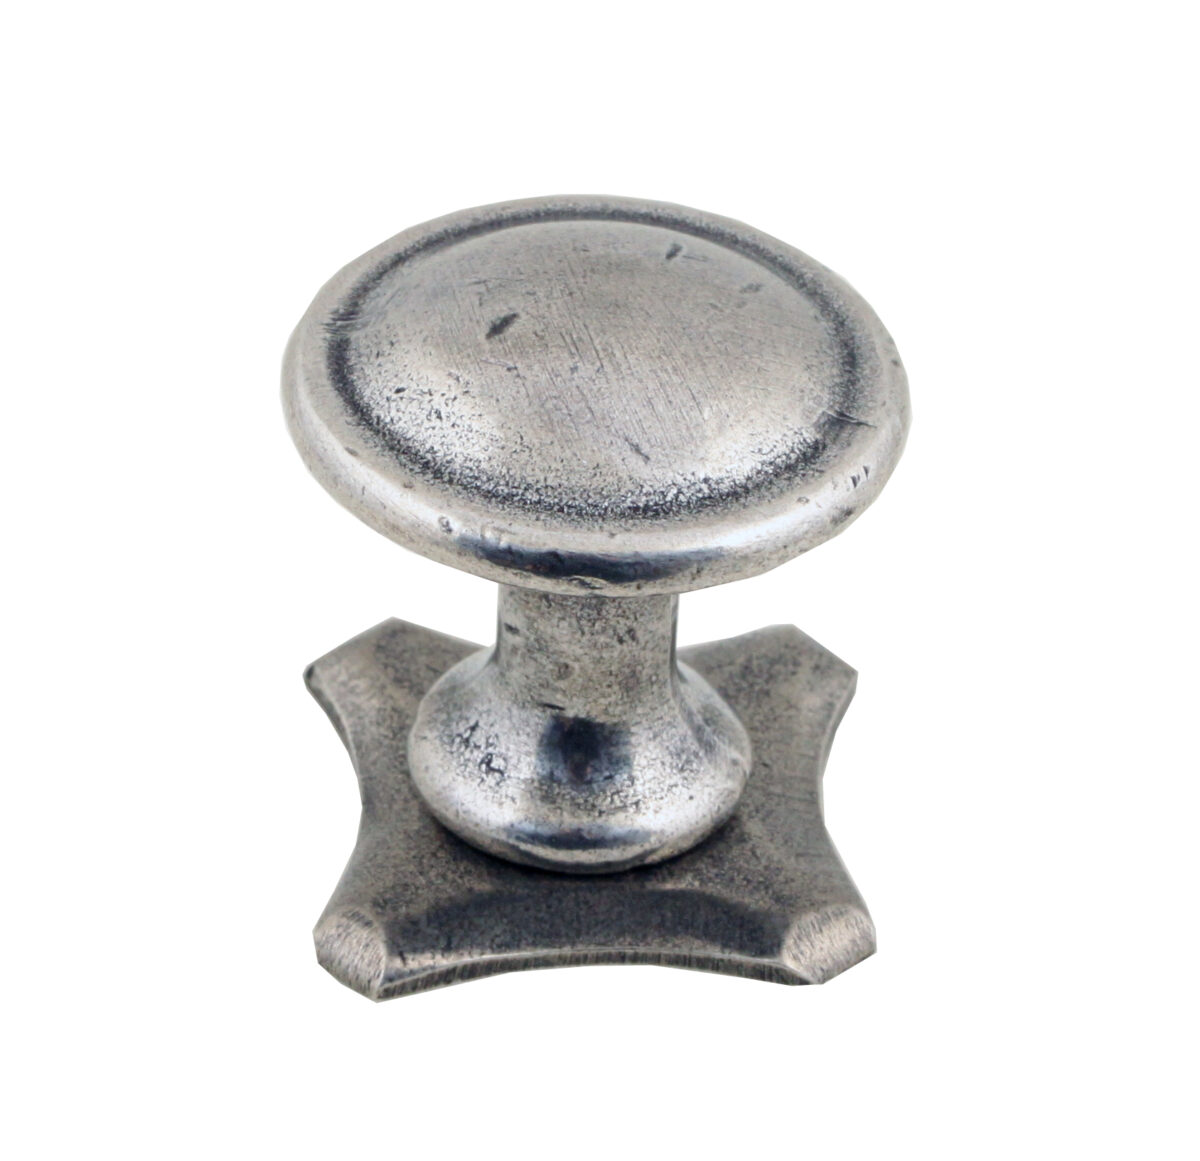 Chester kitchen knob with PB002 backplate